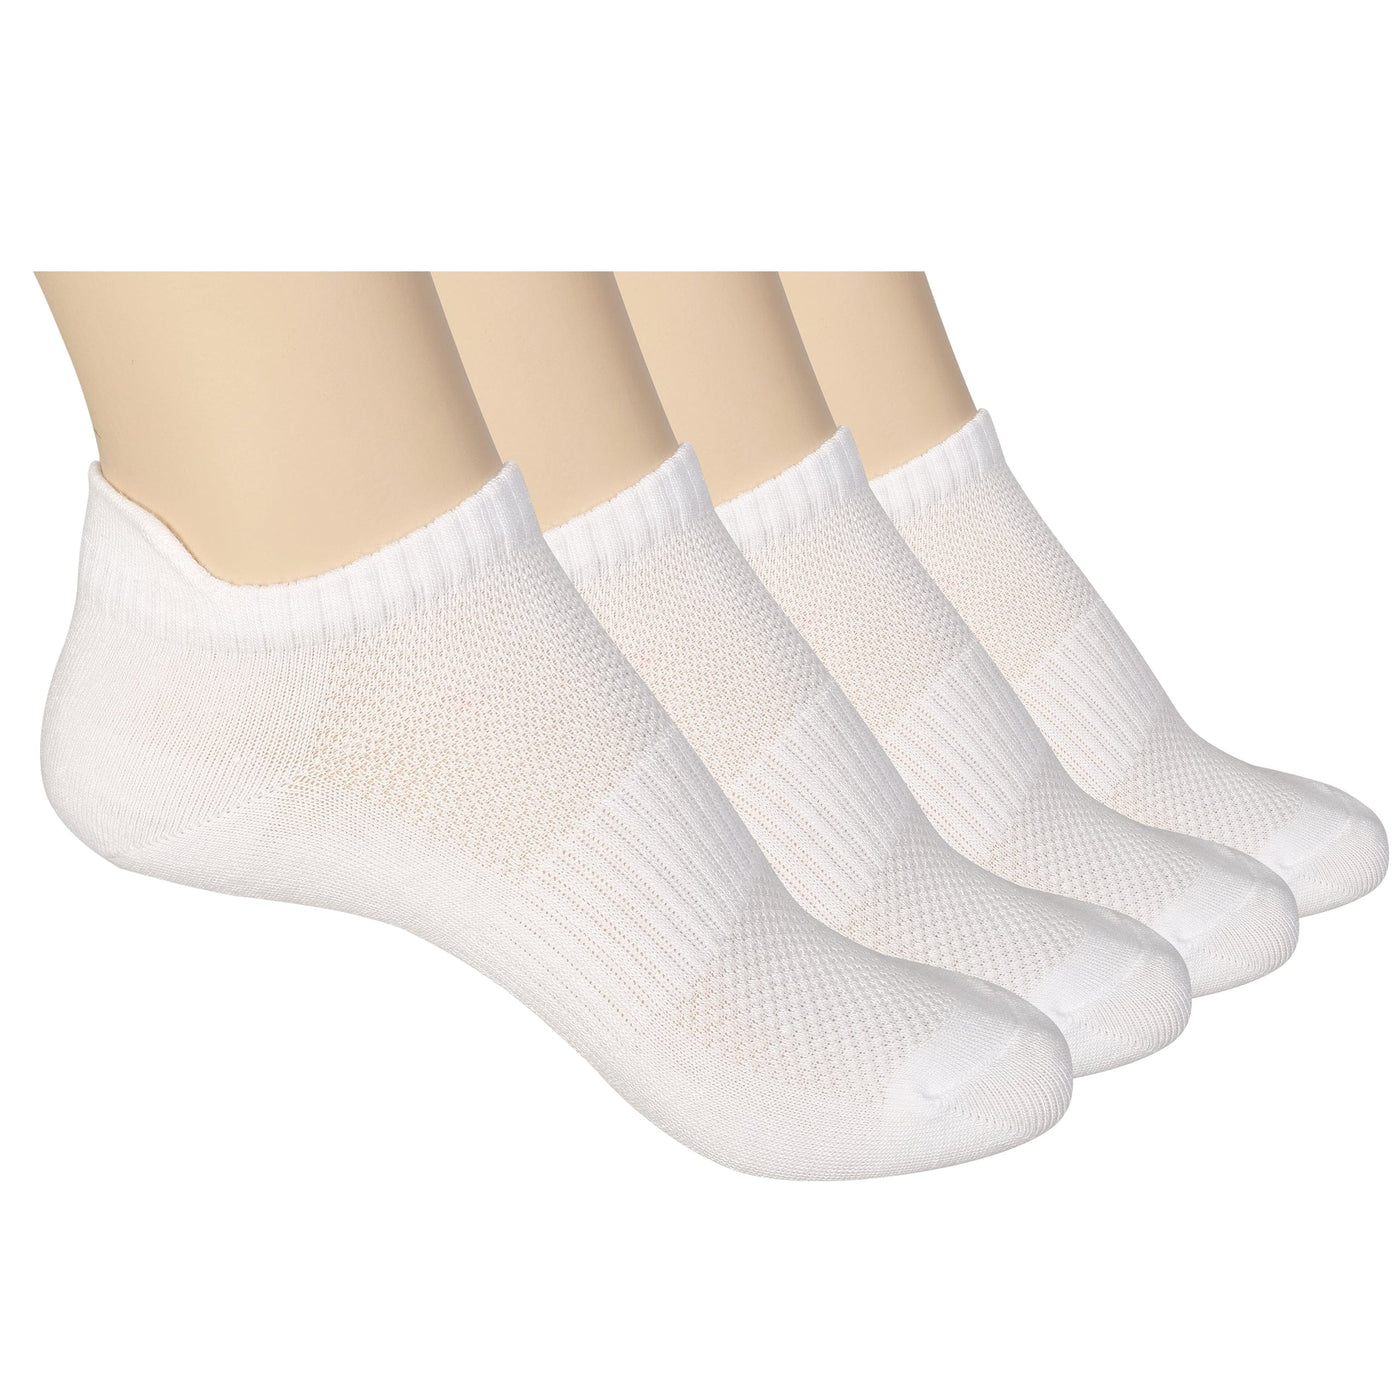 Unisex Ankle Socks - 4 Pairs - Bamboo Low Cut Ankle Breathable Sports Unisex Ankle Socks - 4 Pairs - Bamboo Low Cut Ankle Breathable Sports #color_white